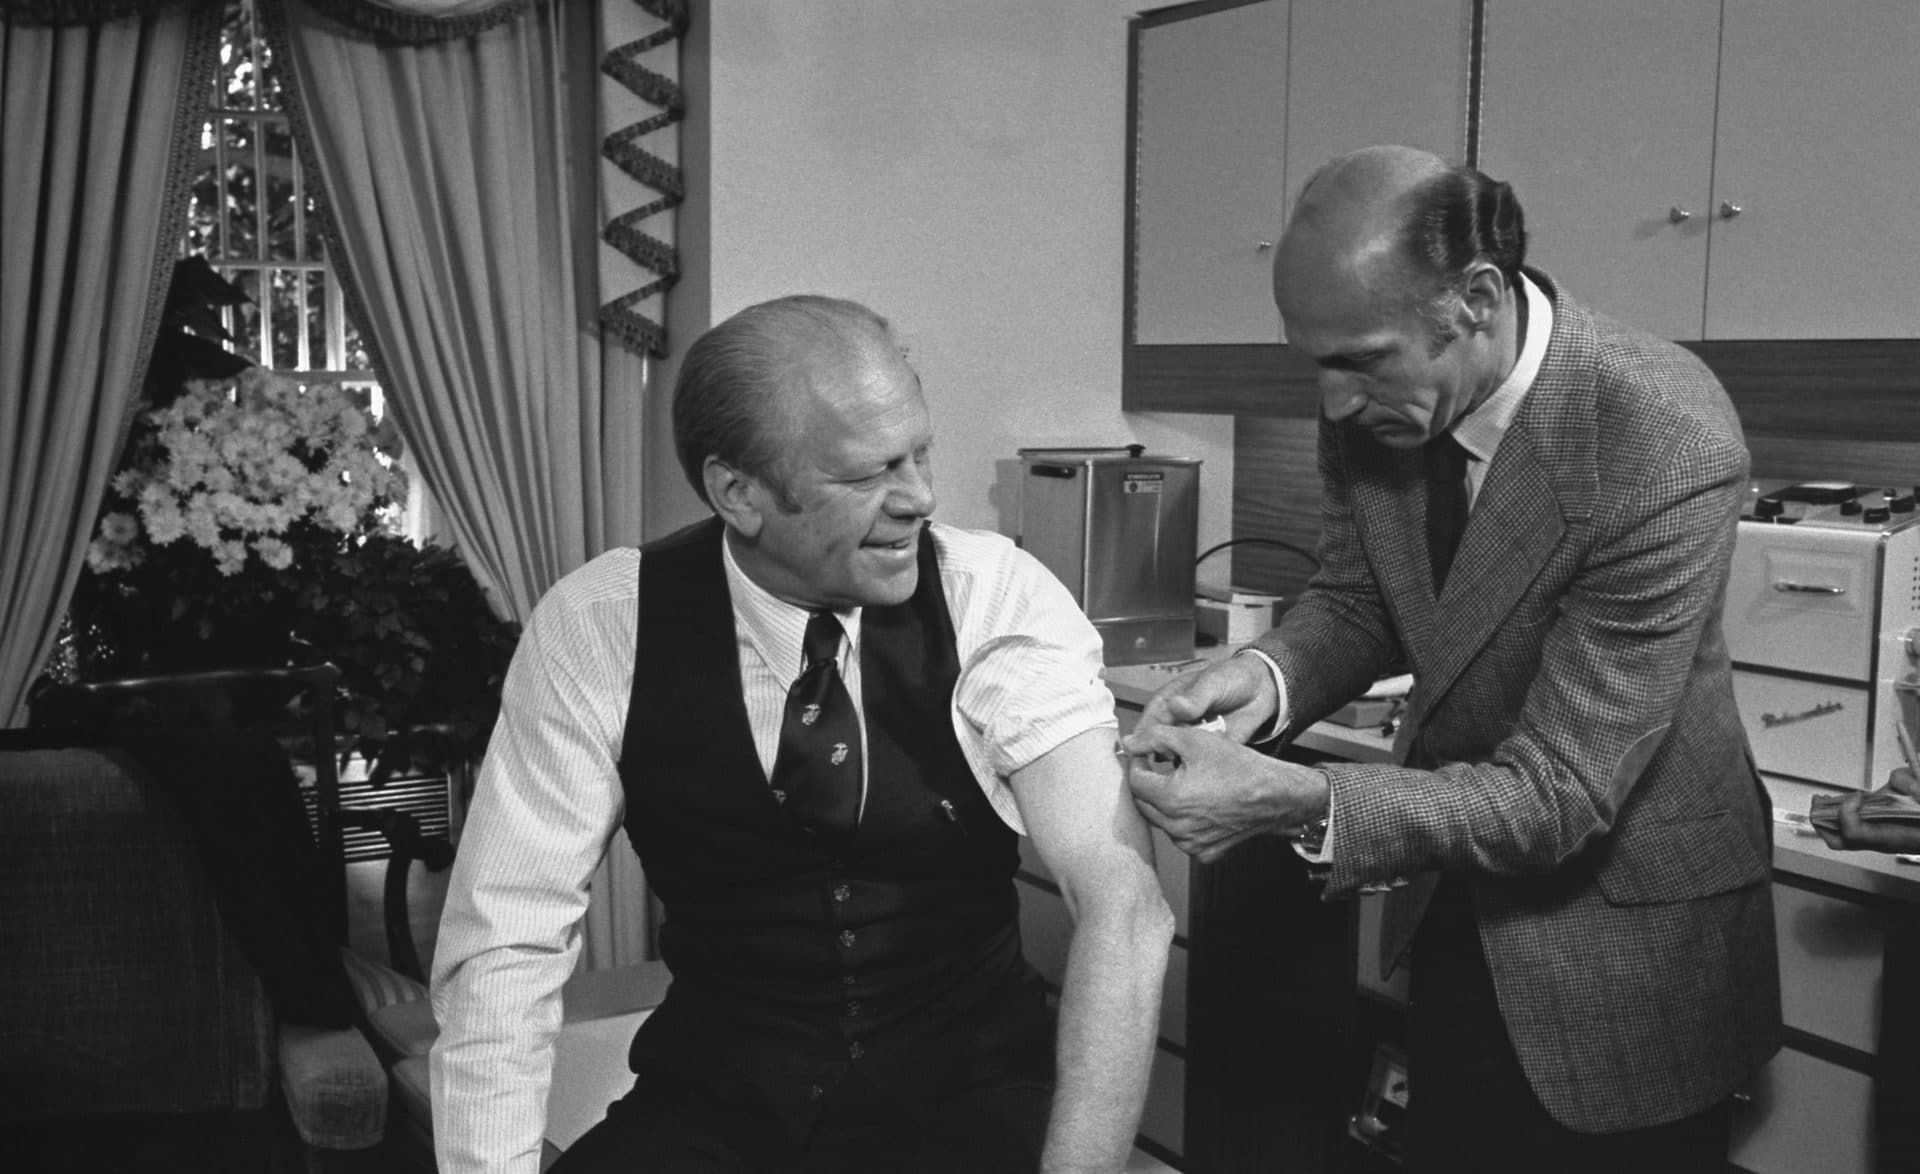 President Ford receives a swine flu inoculation from his White House physician, Dr. William Lukash, on October 14, 1976. (Gerald R. Ford Library)